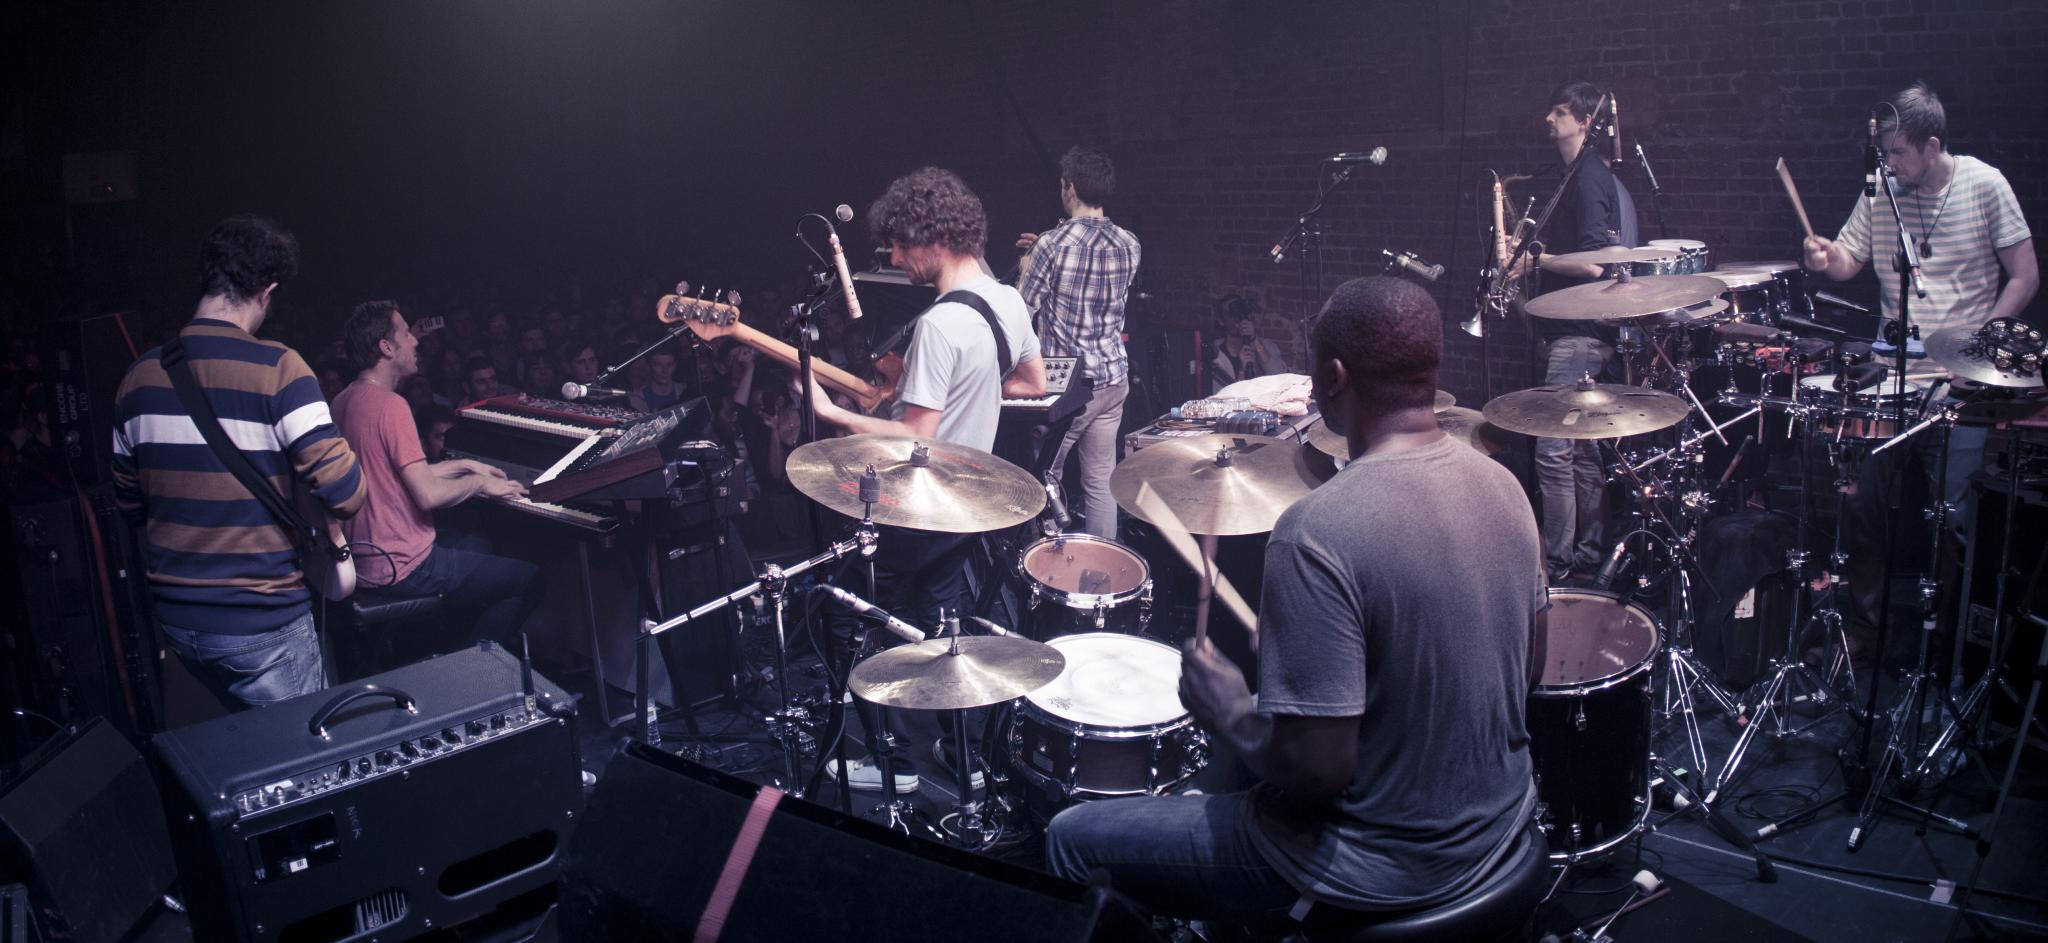 Snarky Puppy vuelve a explotar el jazz con “Bad Kids To The Back”. Cusica Plus.